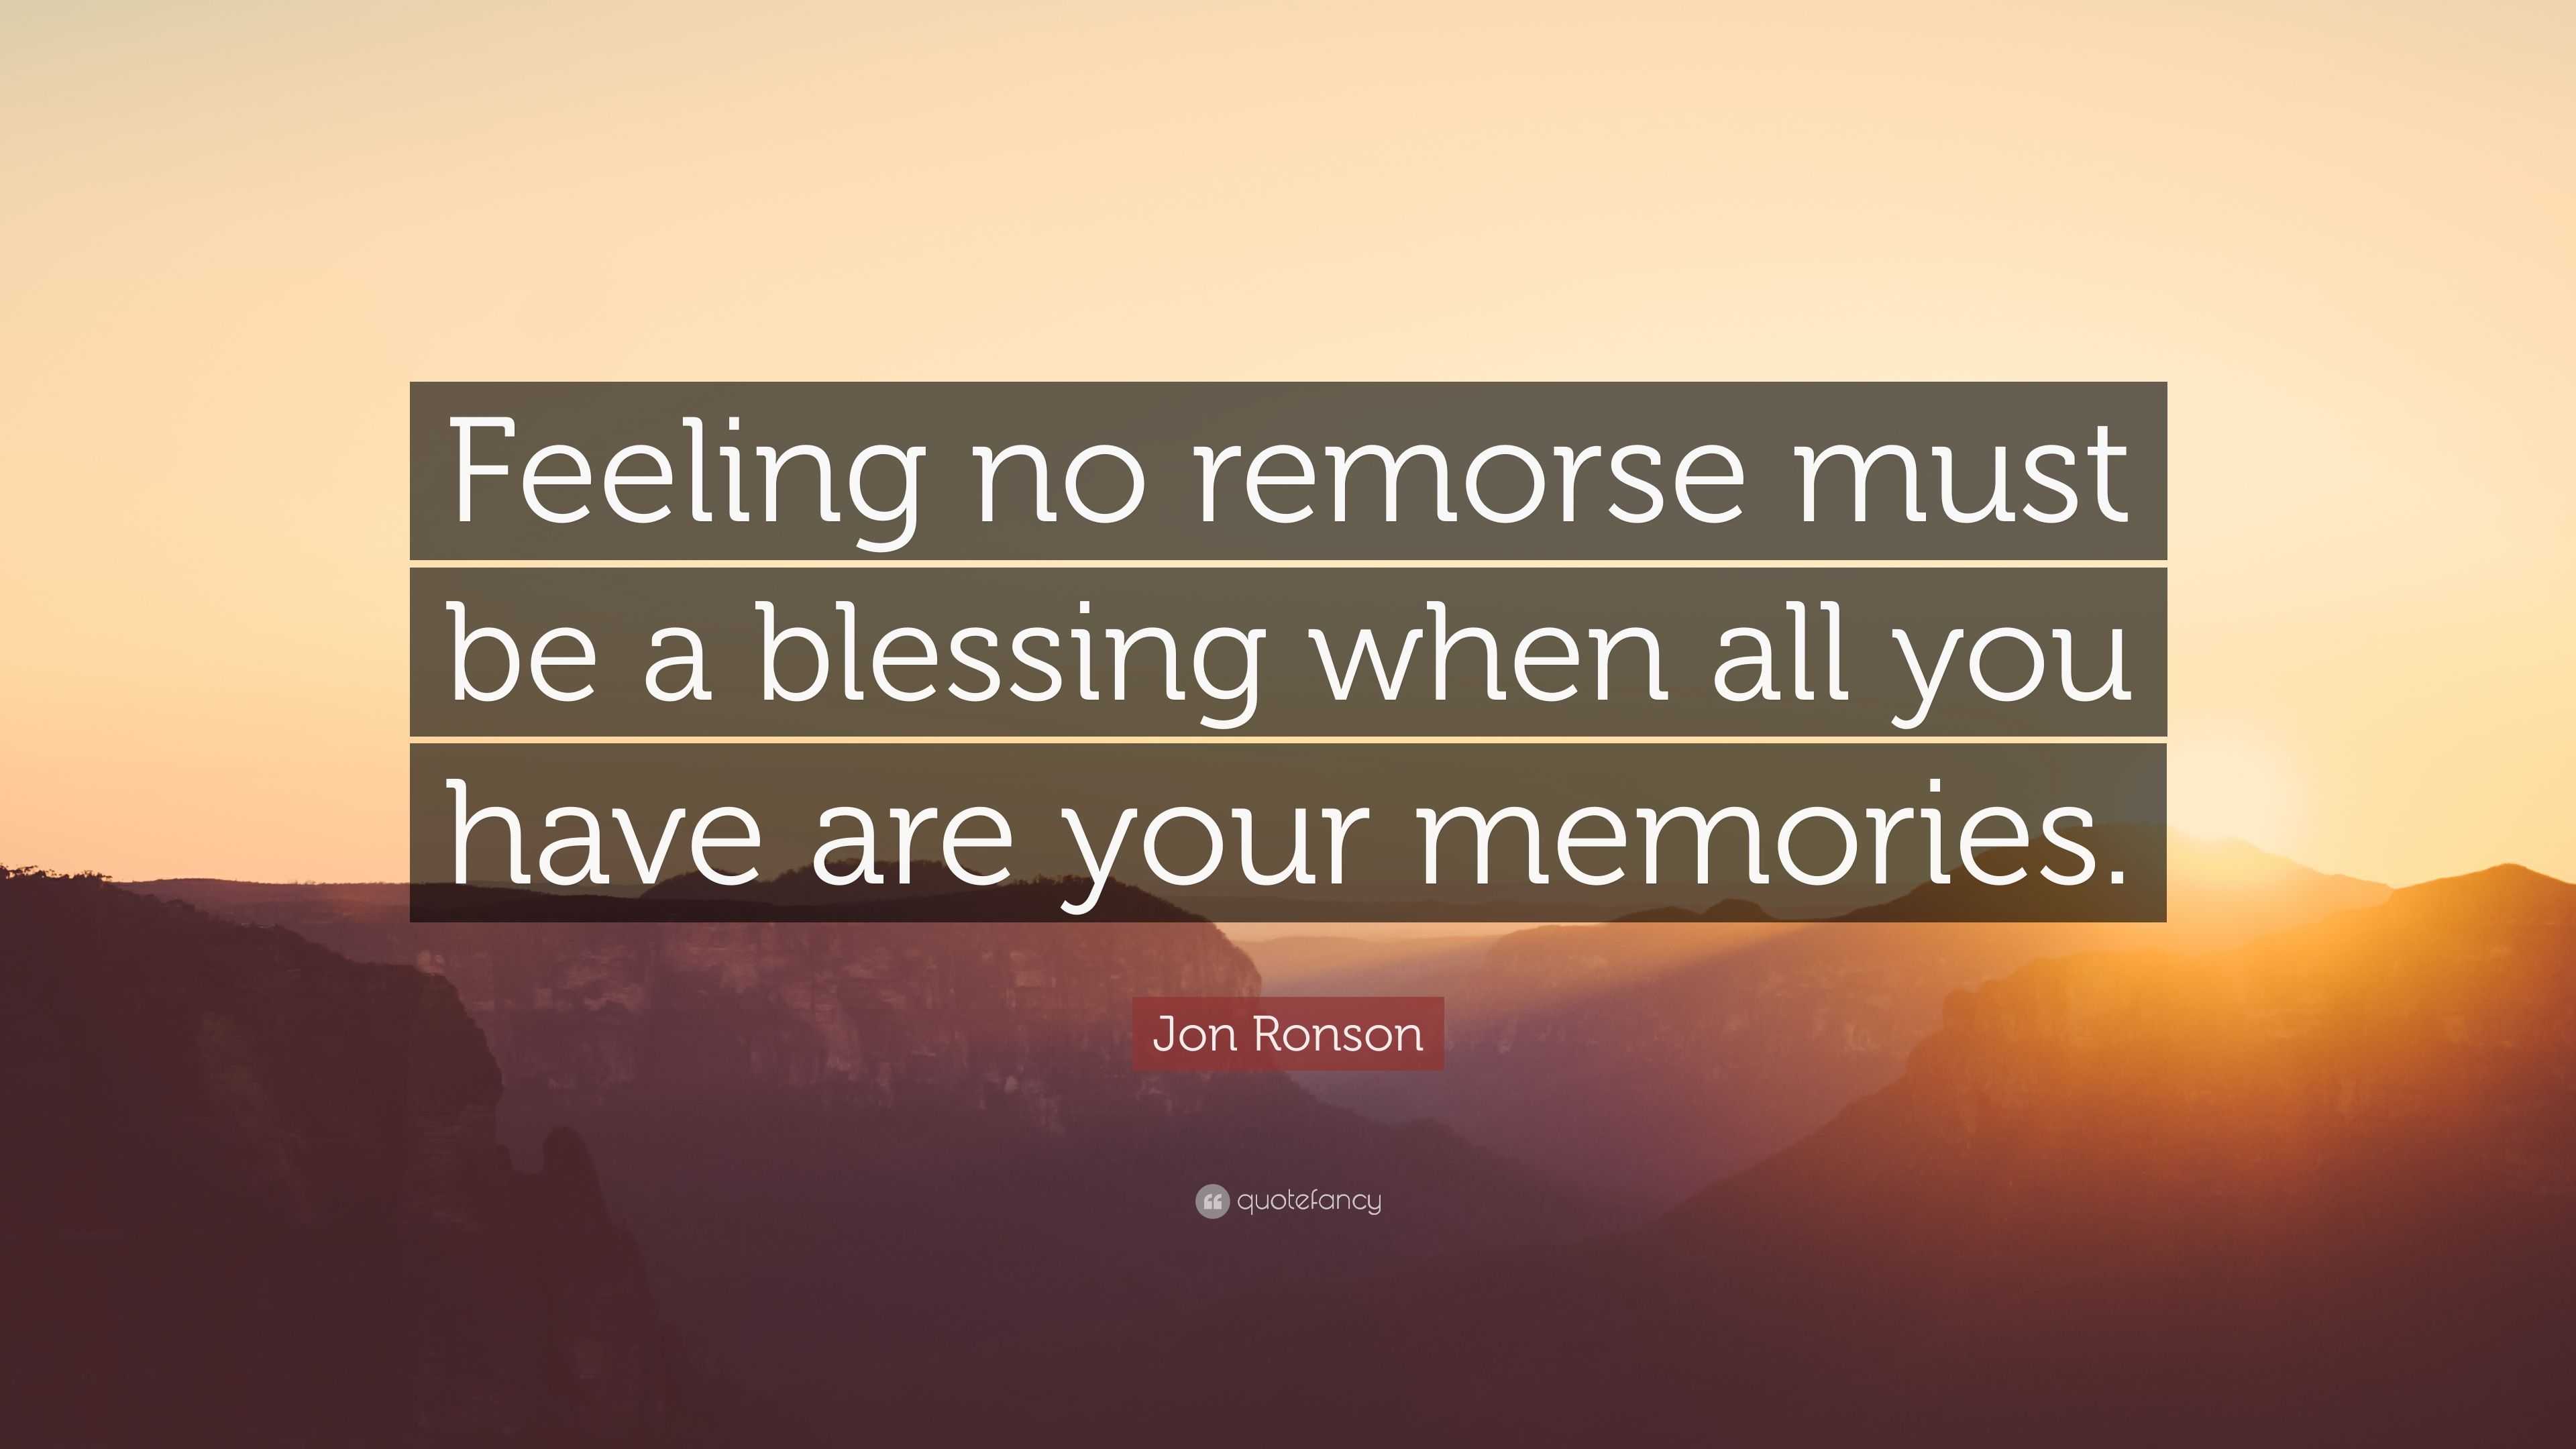 Feeling no remorse must be a blessing when all you have are your memories. 